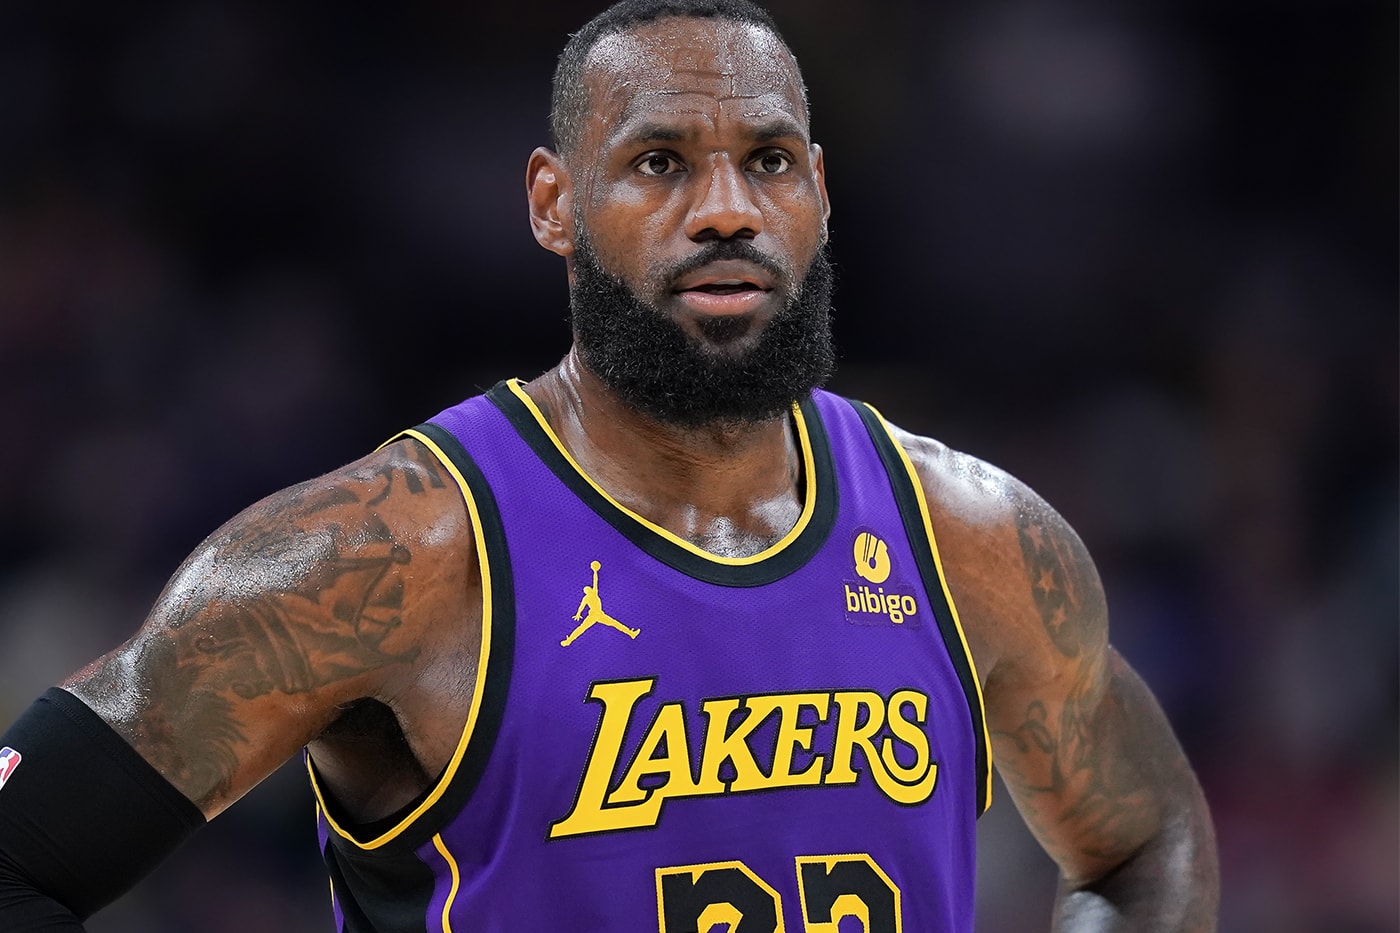 LeBron James SpringHill Company Is Producing a Basketball Docuseries eight-episode series, titled “Uninterrupted: The Real Stories of Basketball" iconic moments players tories players vice tv summer